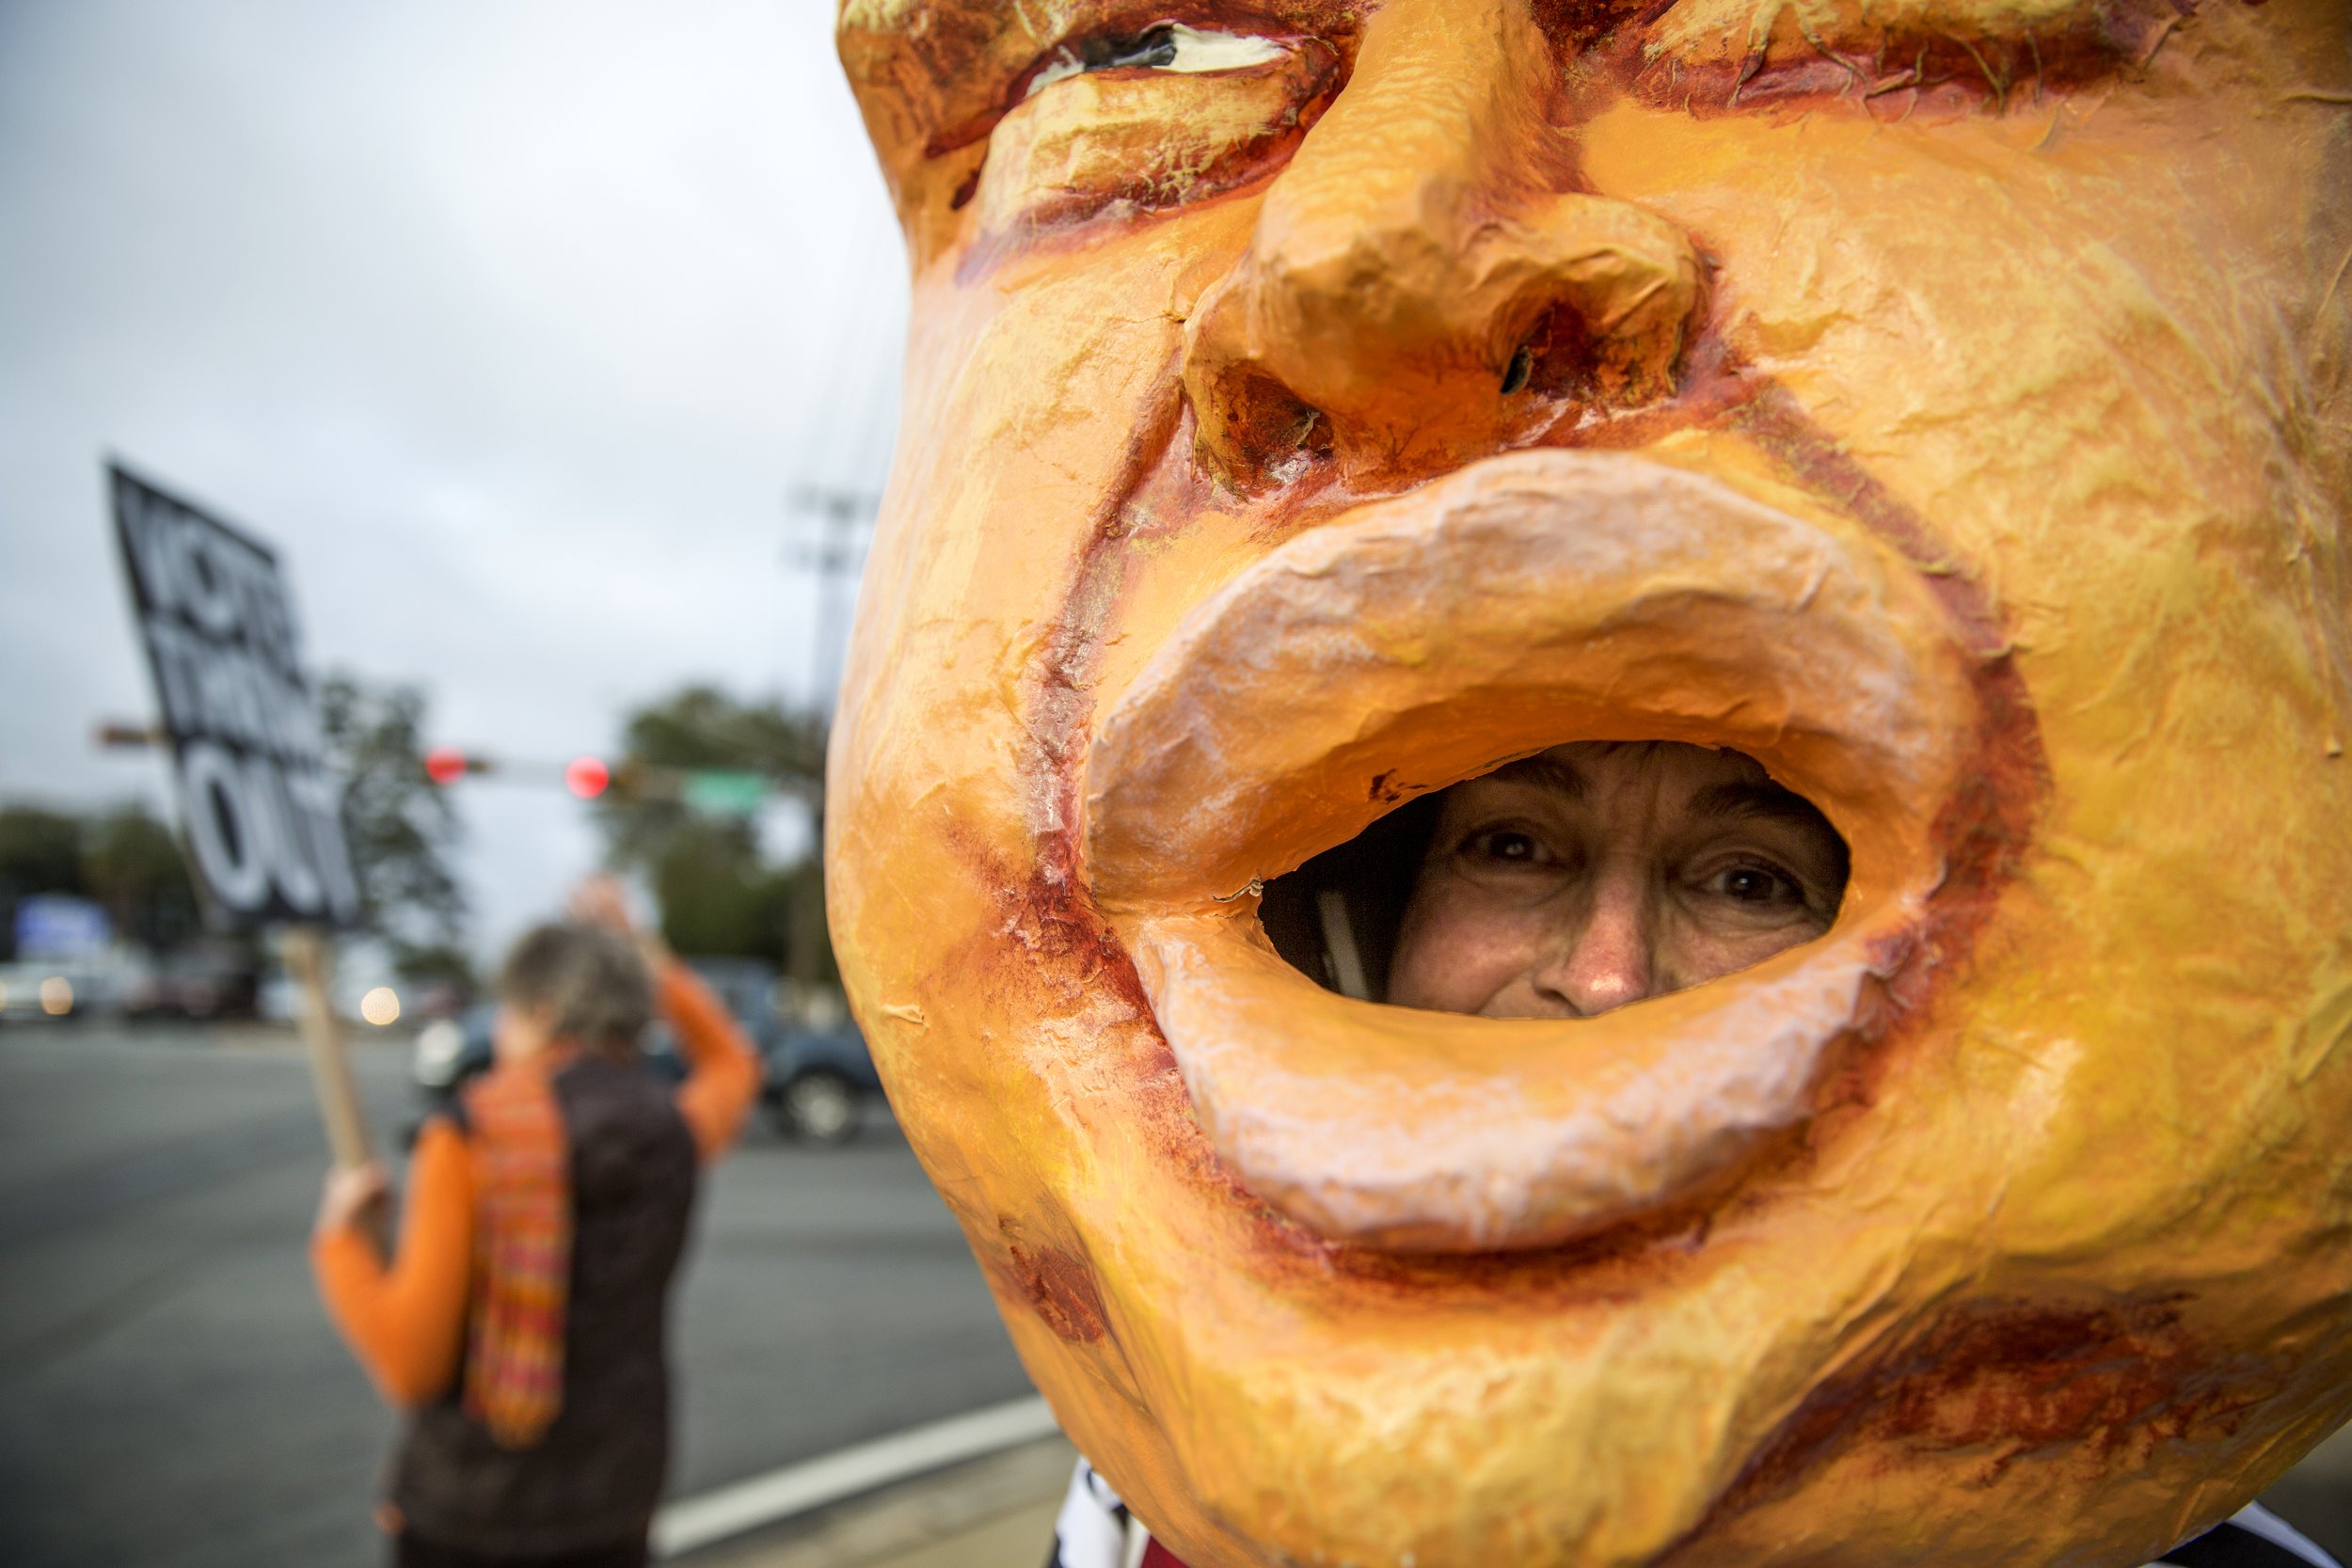  Ruthie Chase of the Stone Soup Street Action Committee dons a paper mache head for an Inconvenient Thursday Street Action at a busy intersection on Tallahassee, Fla., on Feb 8, 2018. The group has been taking to street corners every Thursday since t